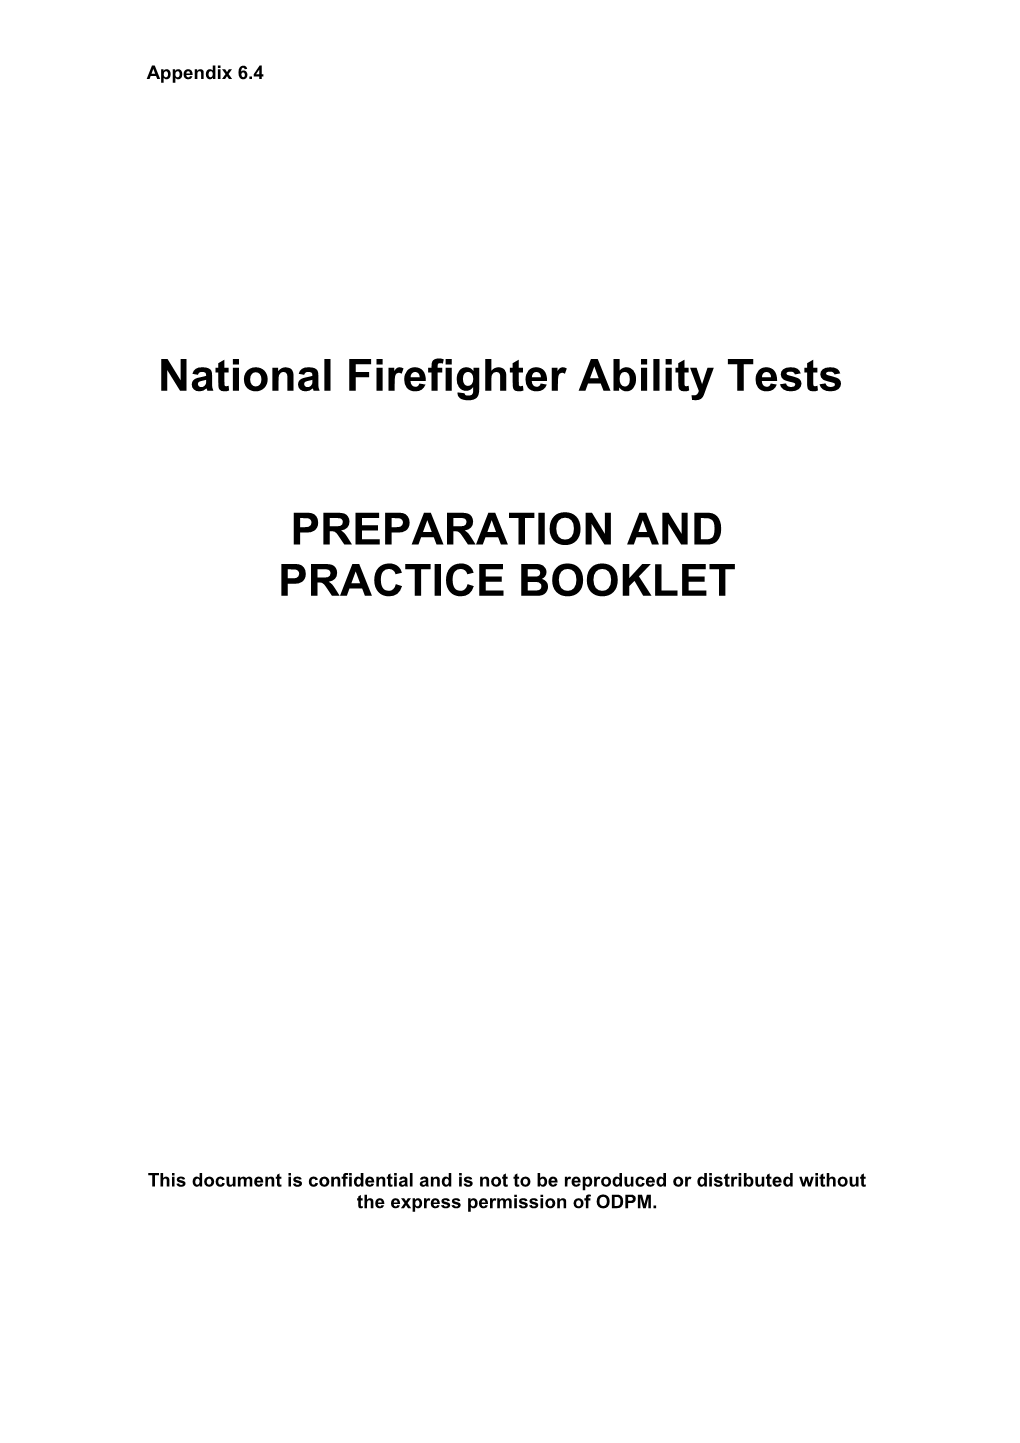 National Firefighter Ability Tests